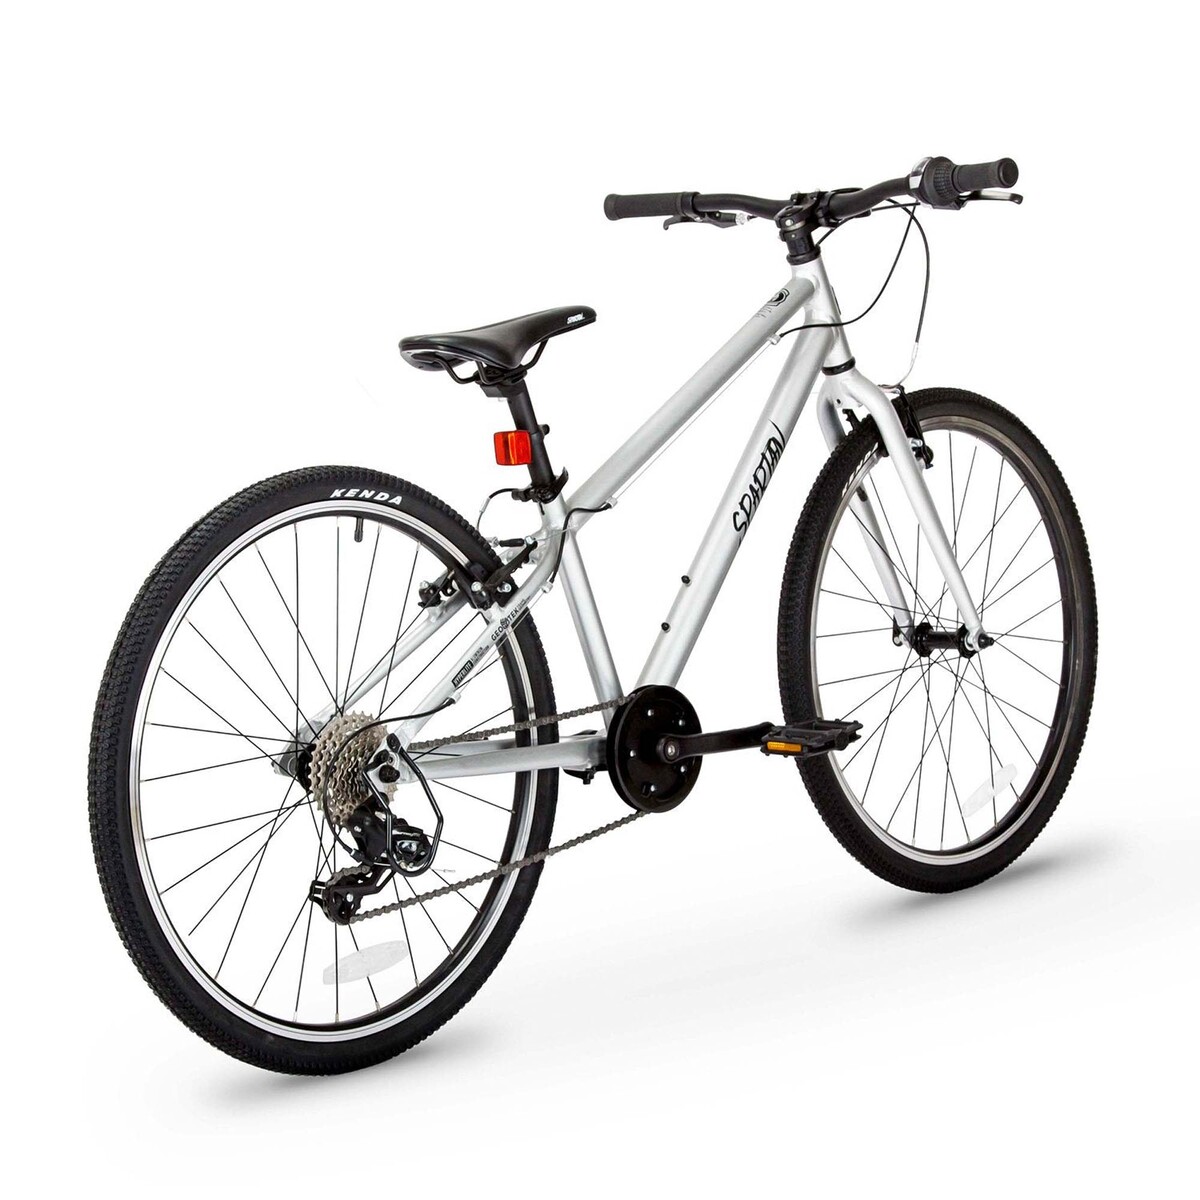 Spartan 26 inches Hyperlite Alloy Bicycle, Silver, SP-3145